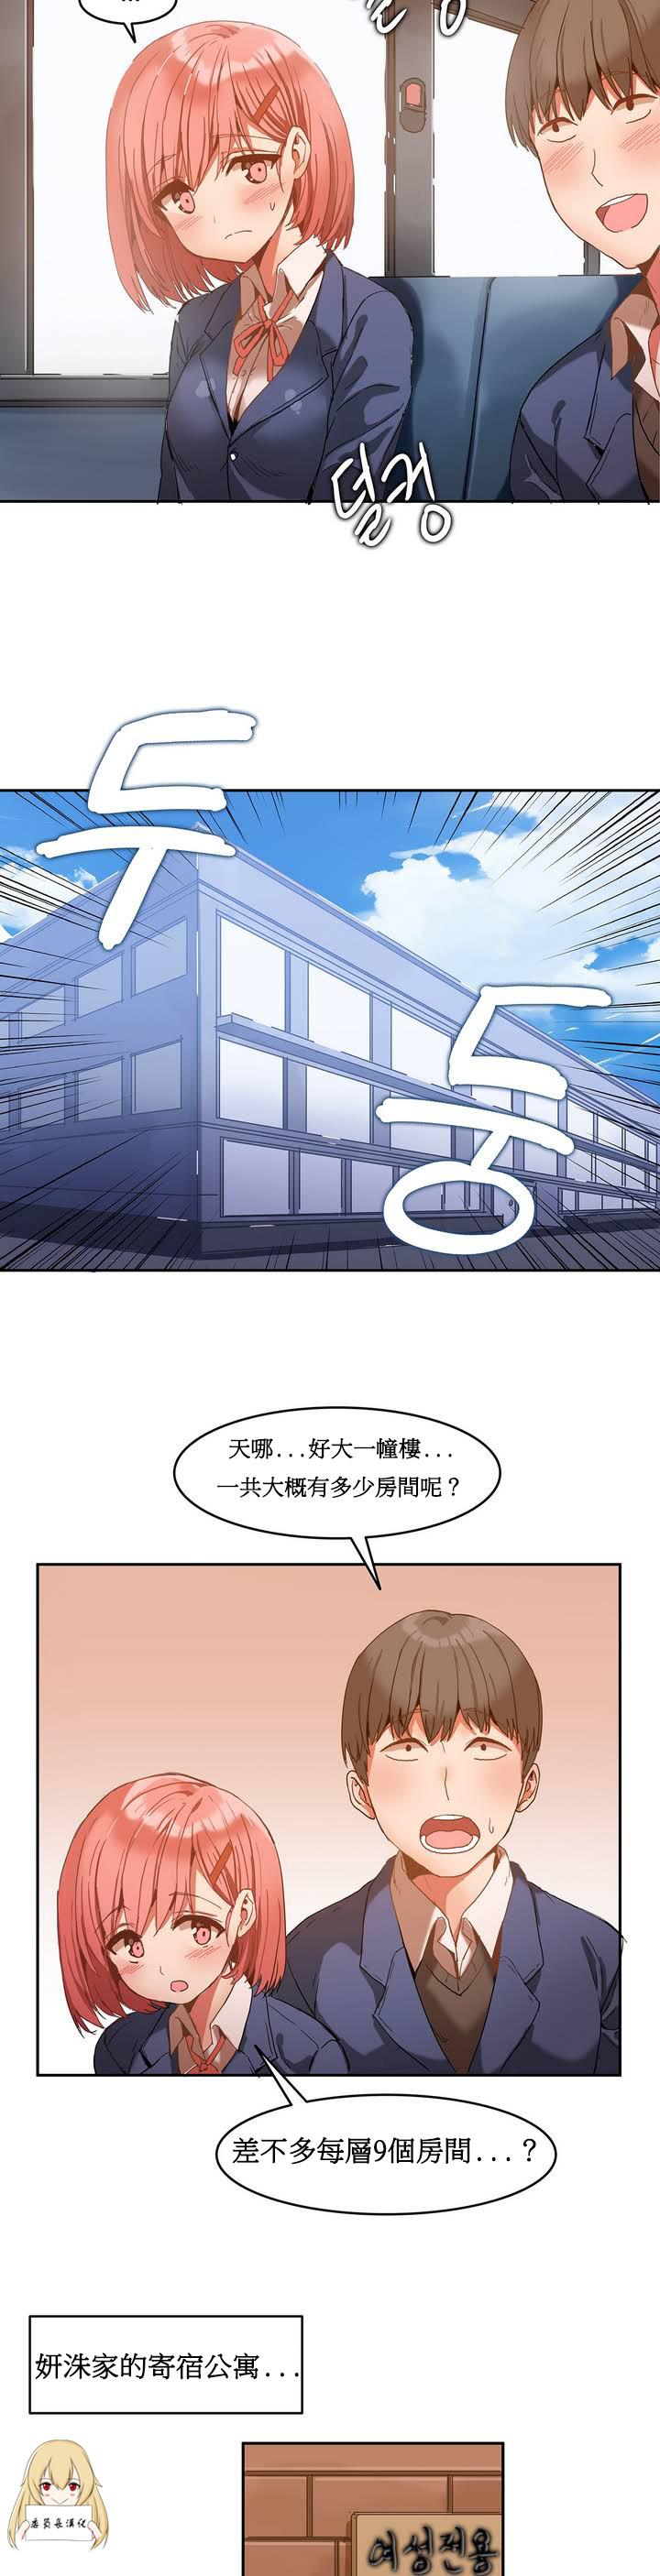 Pickup Hahri's Lumpy Boardhouse Ch. 1~5【委員長個人漢化】（持續更新） Bottom - Page 11